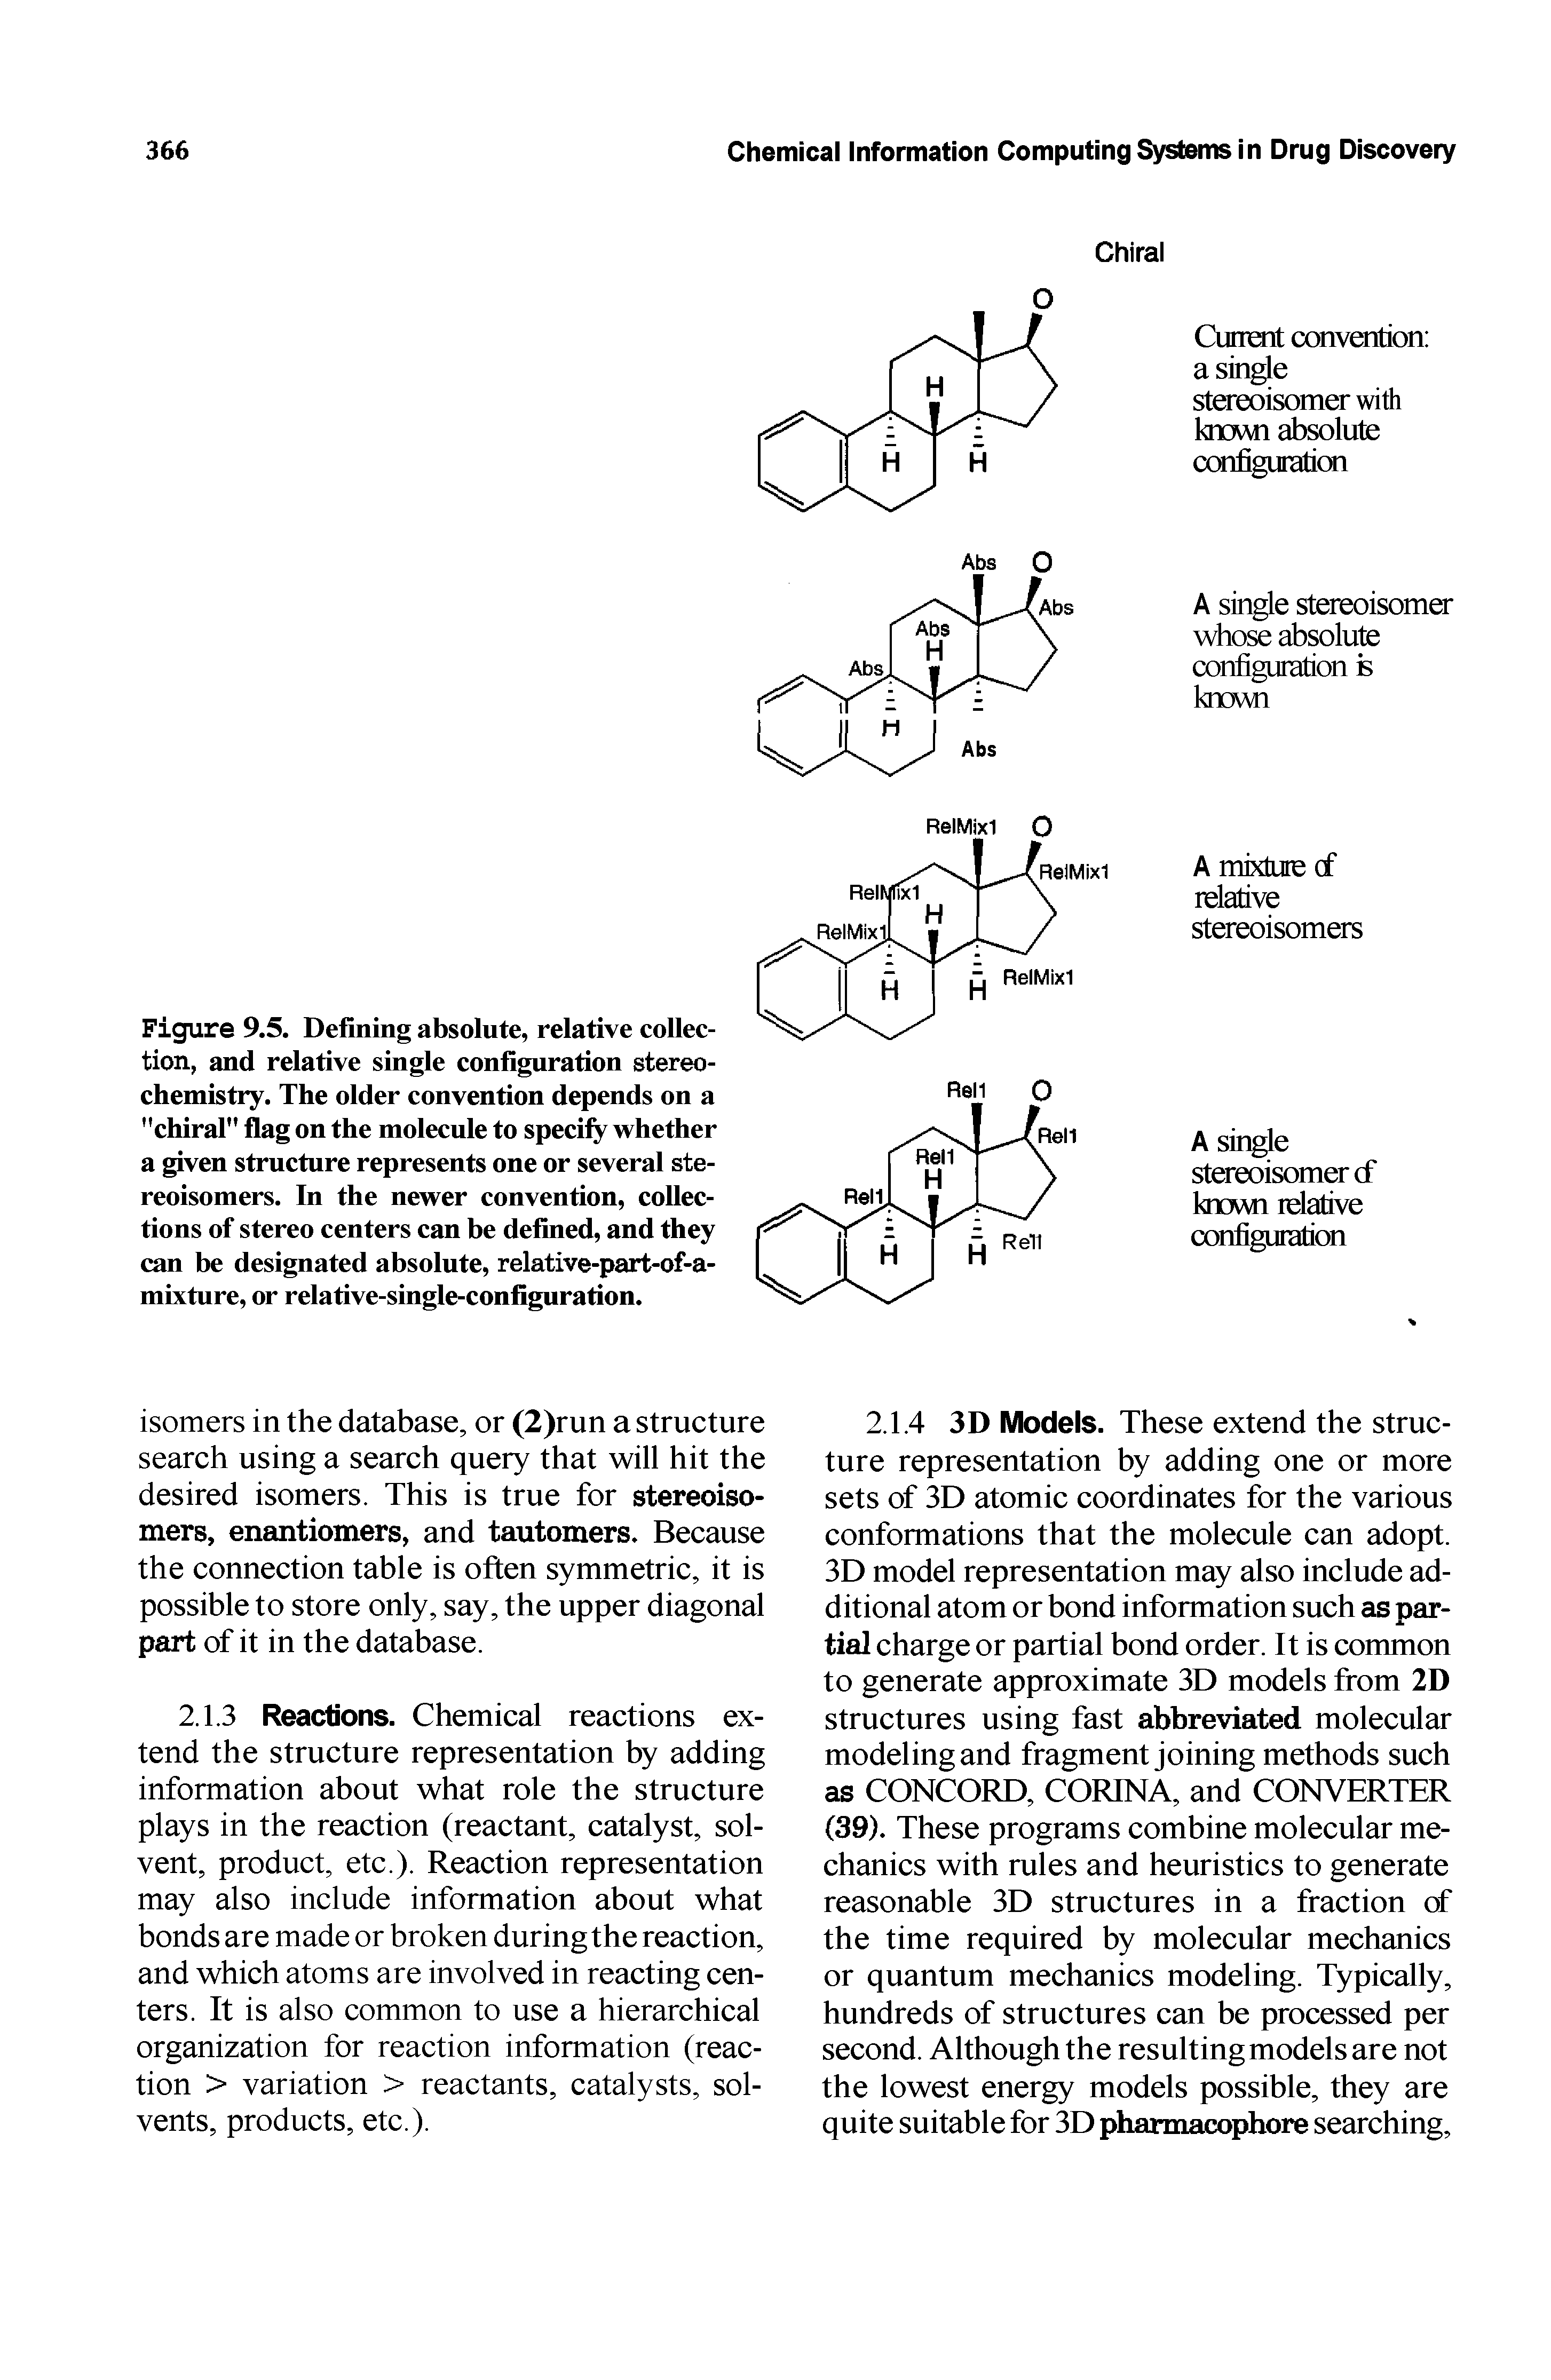 Figure 9.5. Defining absolute, relative collection, and relative single configuration stereochemistry. The older convention depends on a "chiral" flag on the molecule to specify whether a given structure represents one or several stereoisomers. In the newer convention, collections of stereo centers can be defined, and they can be designated absolute, relative-part-of-a-mixture, or relative-single-configuration.